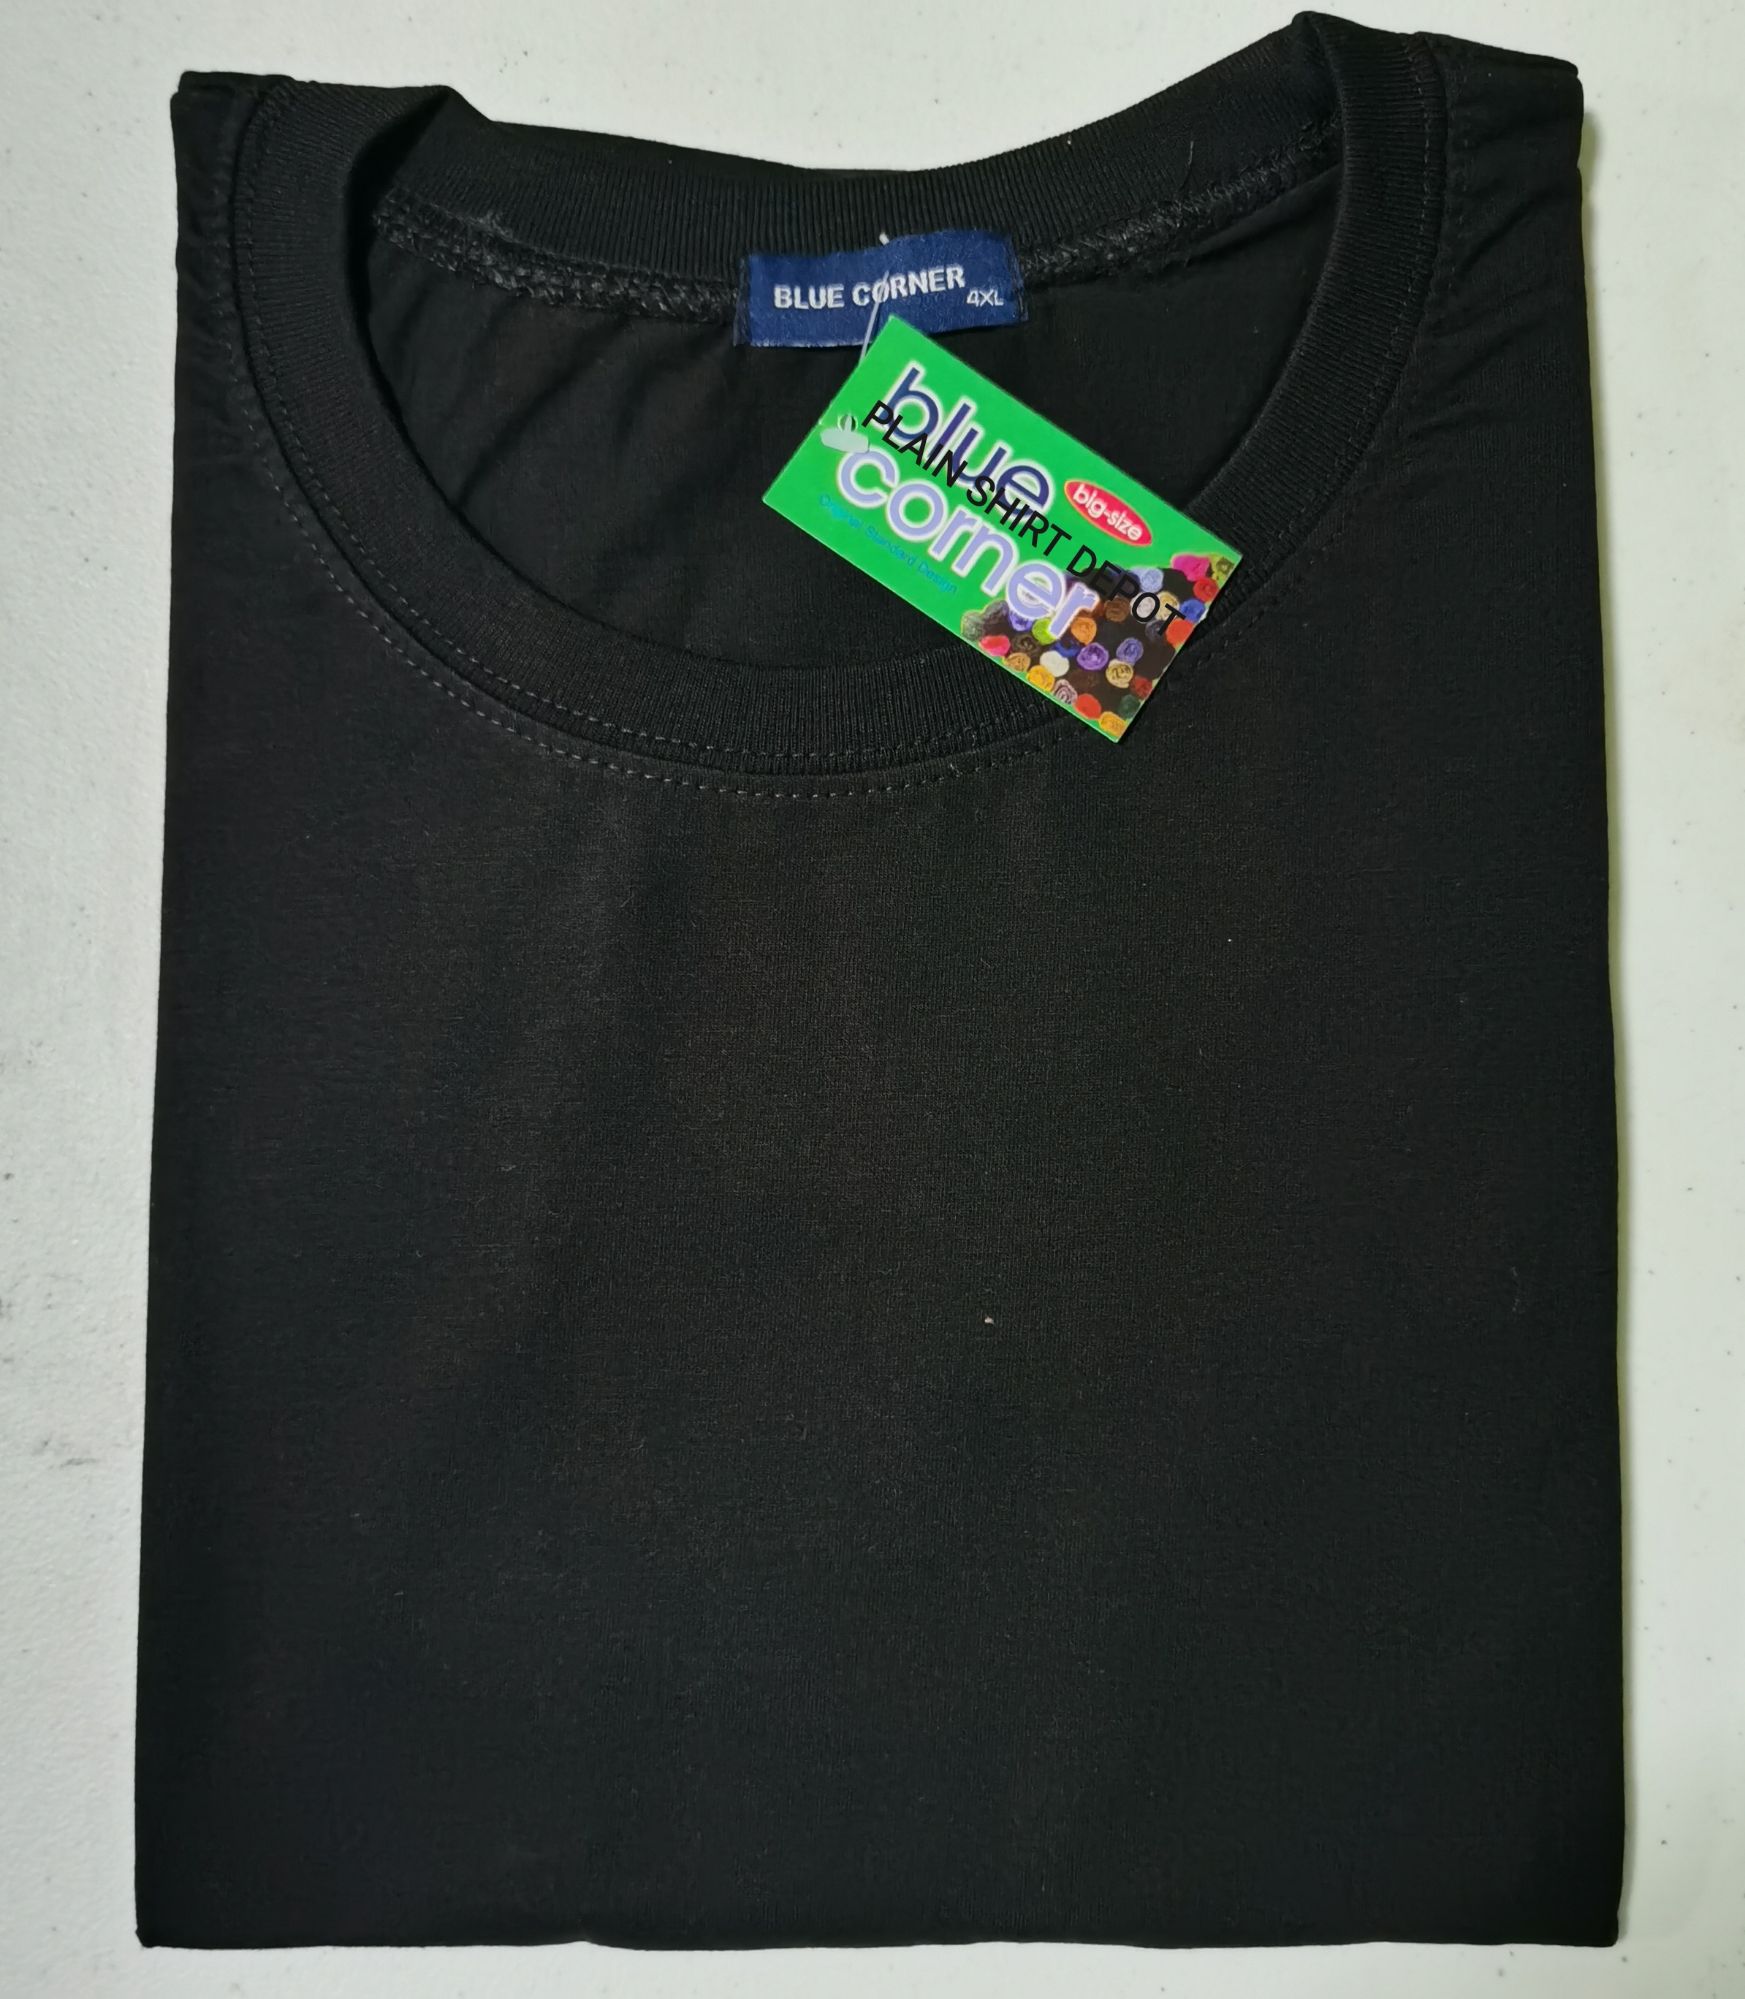 "Black Blue Corner Plain Tee for Adults by Company Name"